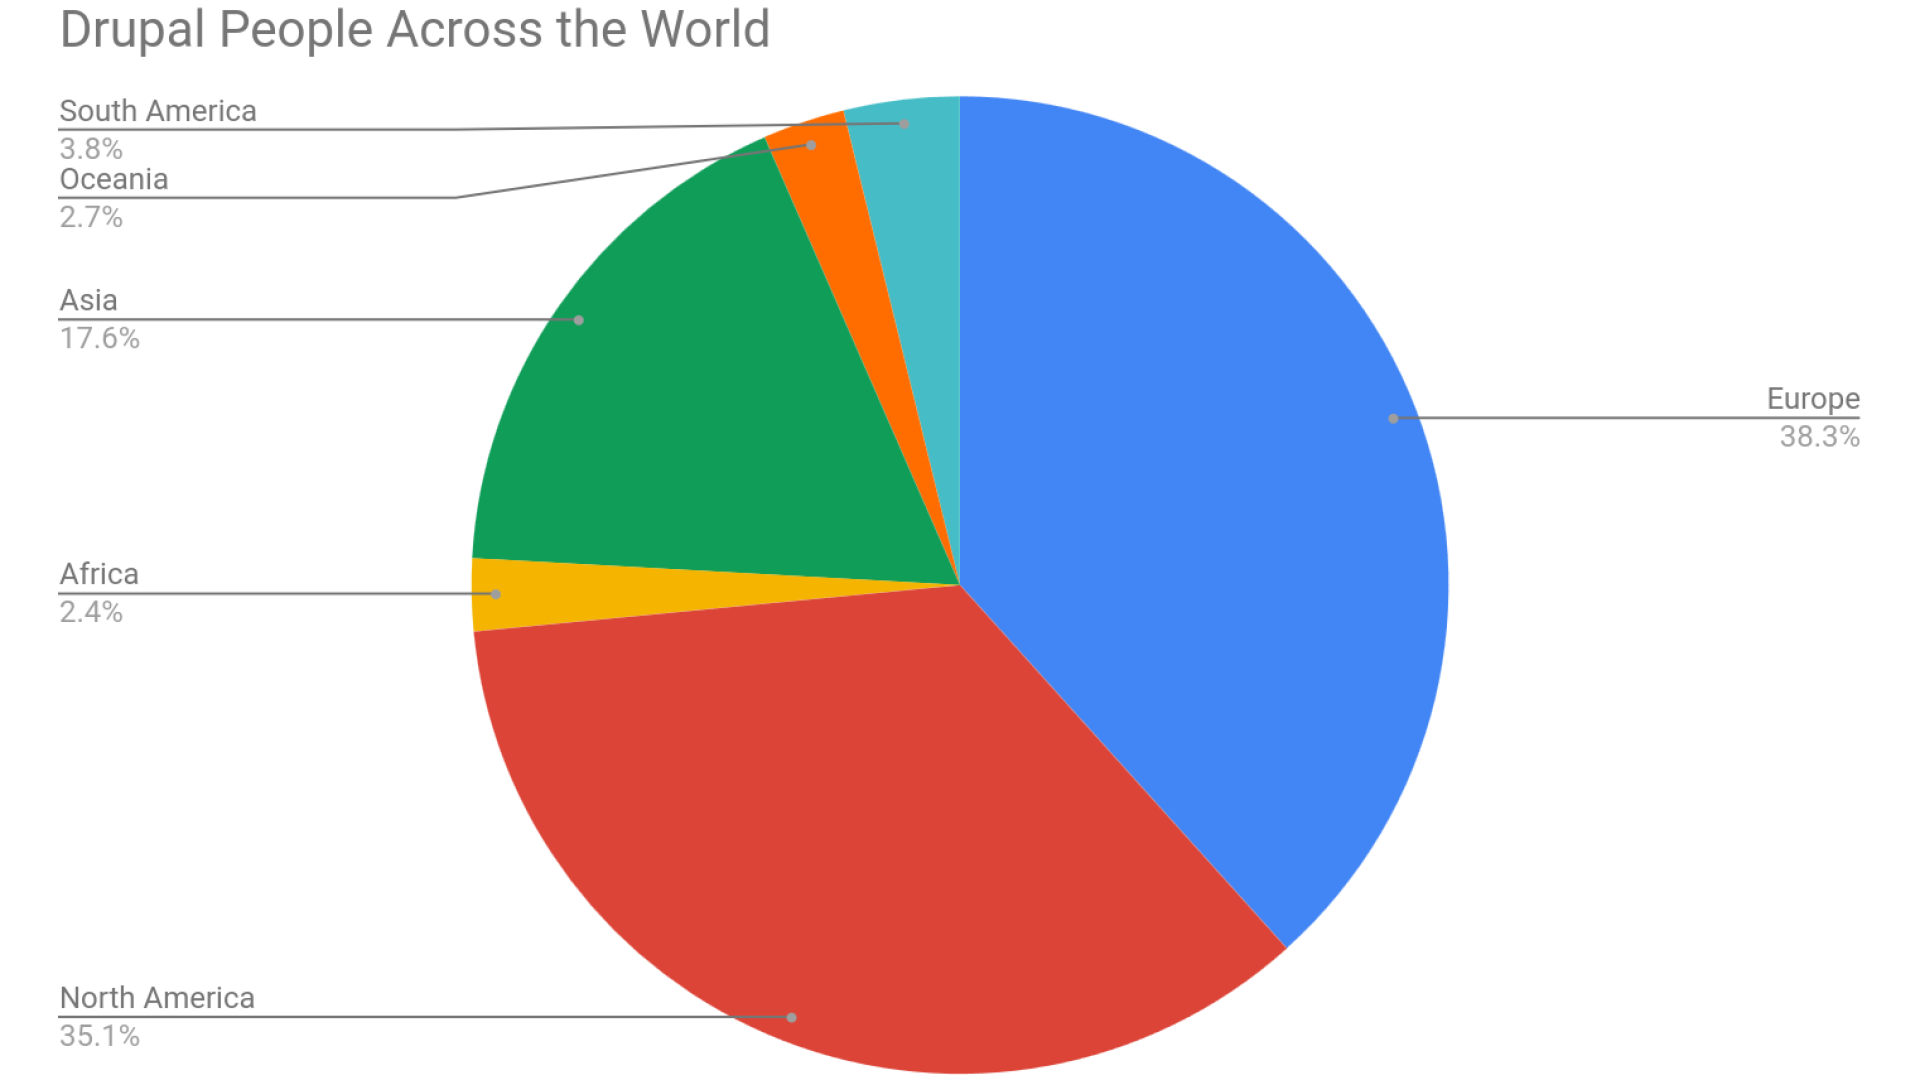 Pie Chart of Drupal People Across the World